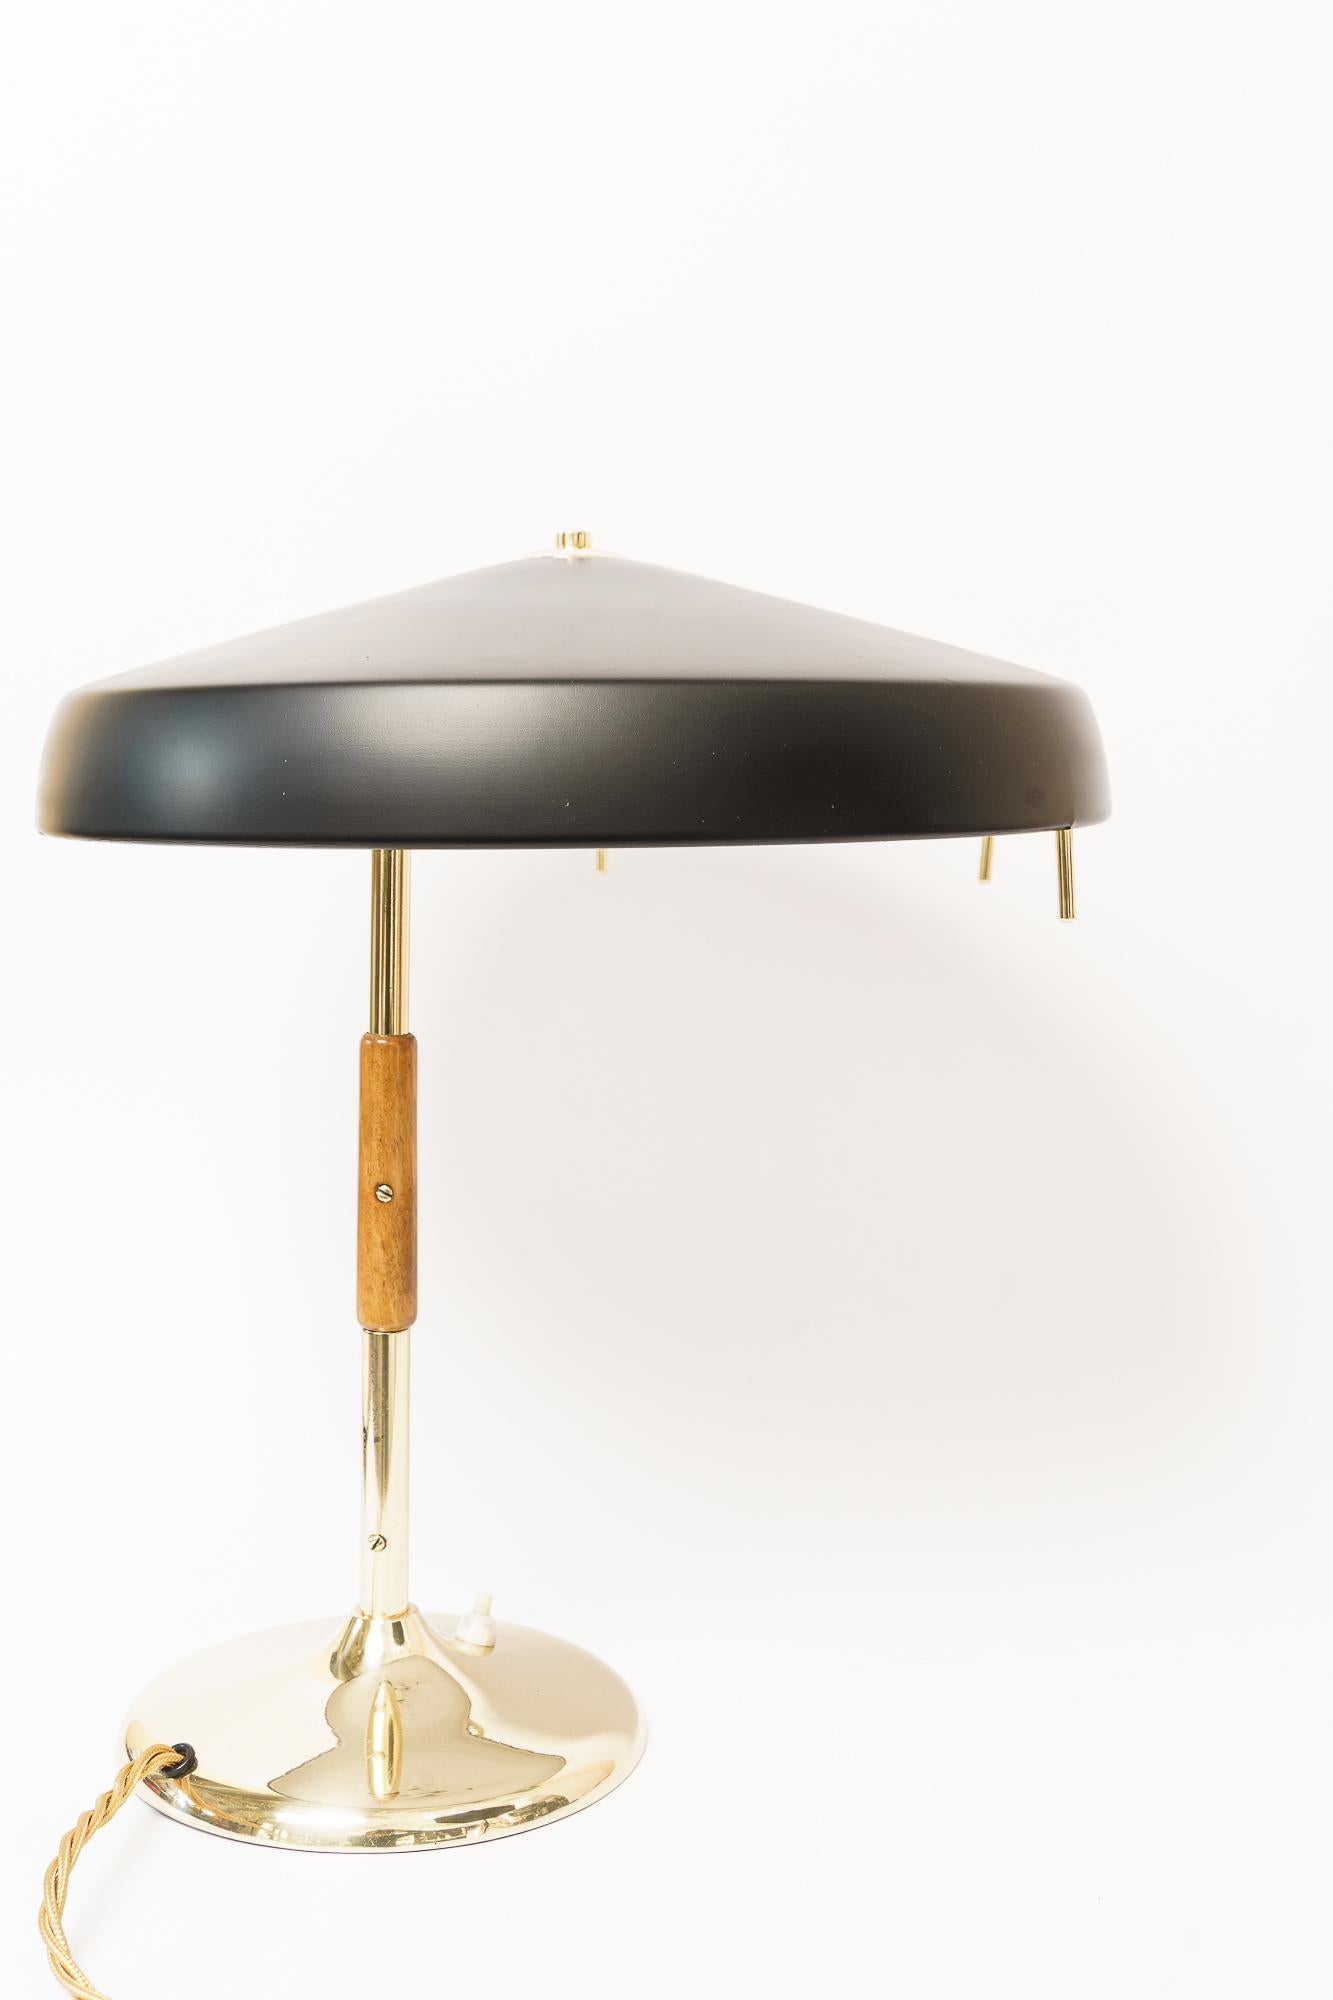 Rupert Nikoll table lamp vienna around 1960s
Brass polished and stove enameled
Wood handle
The shade blackened.